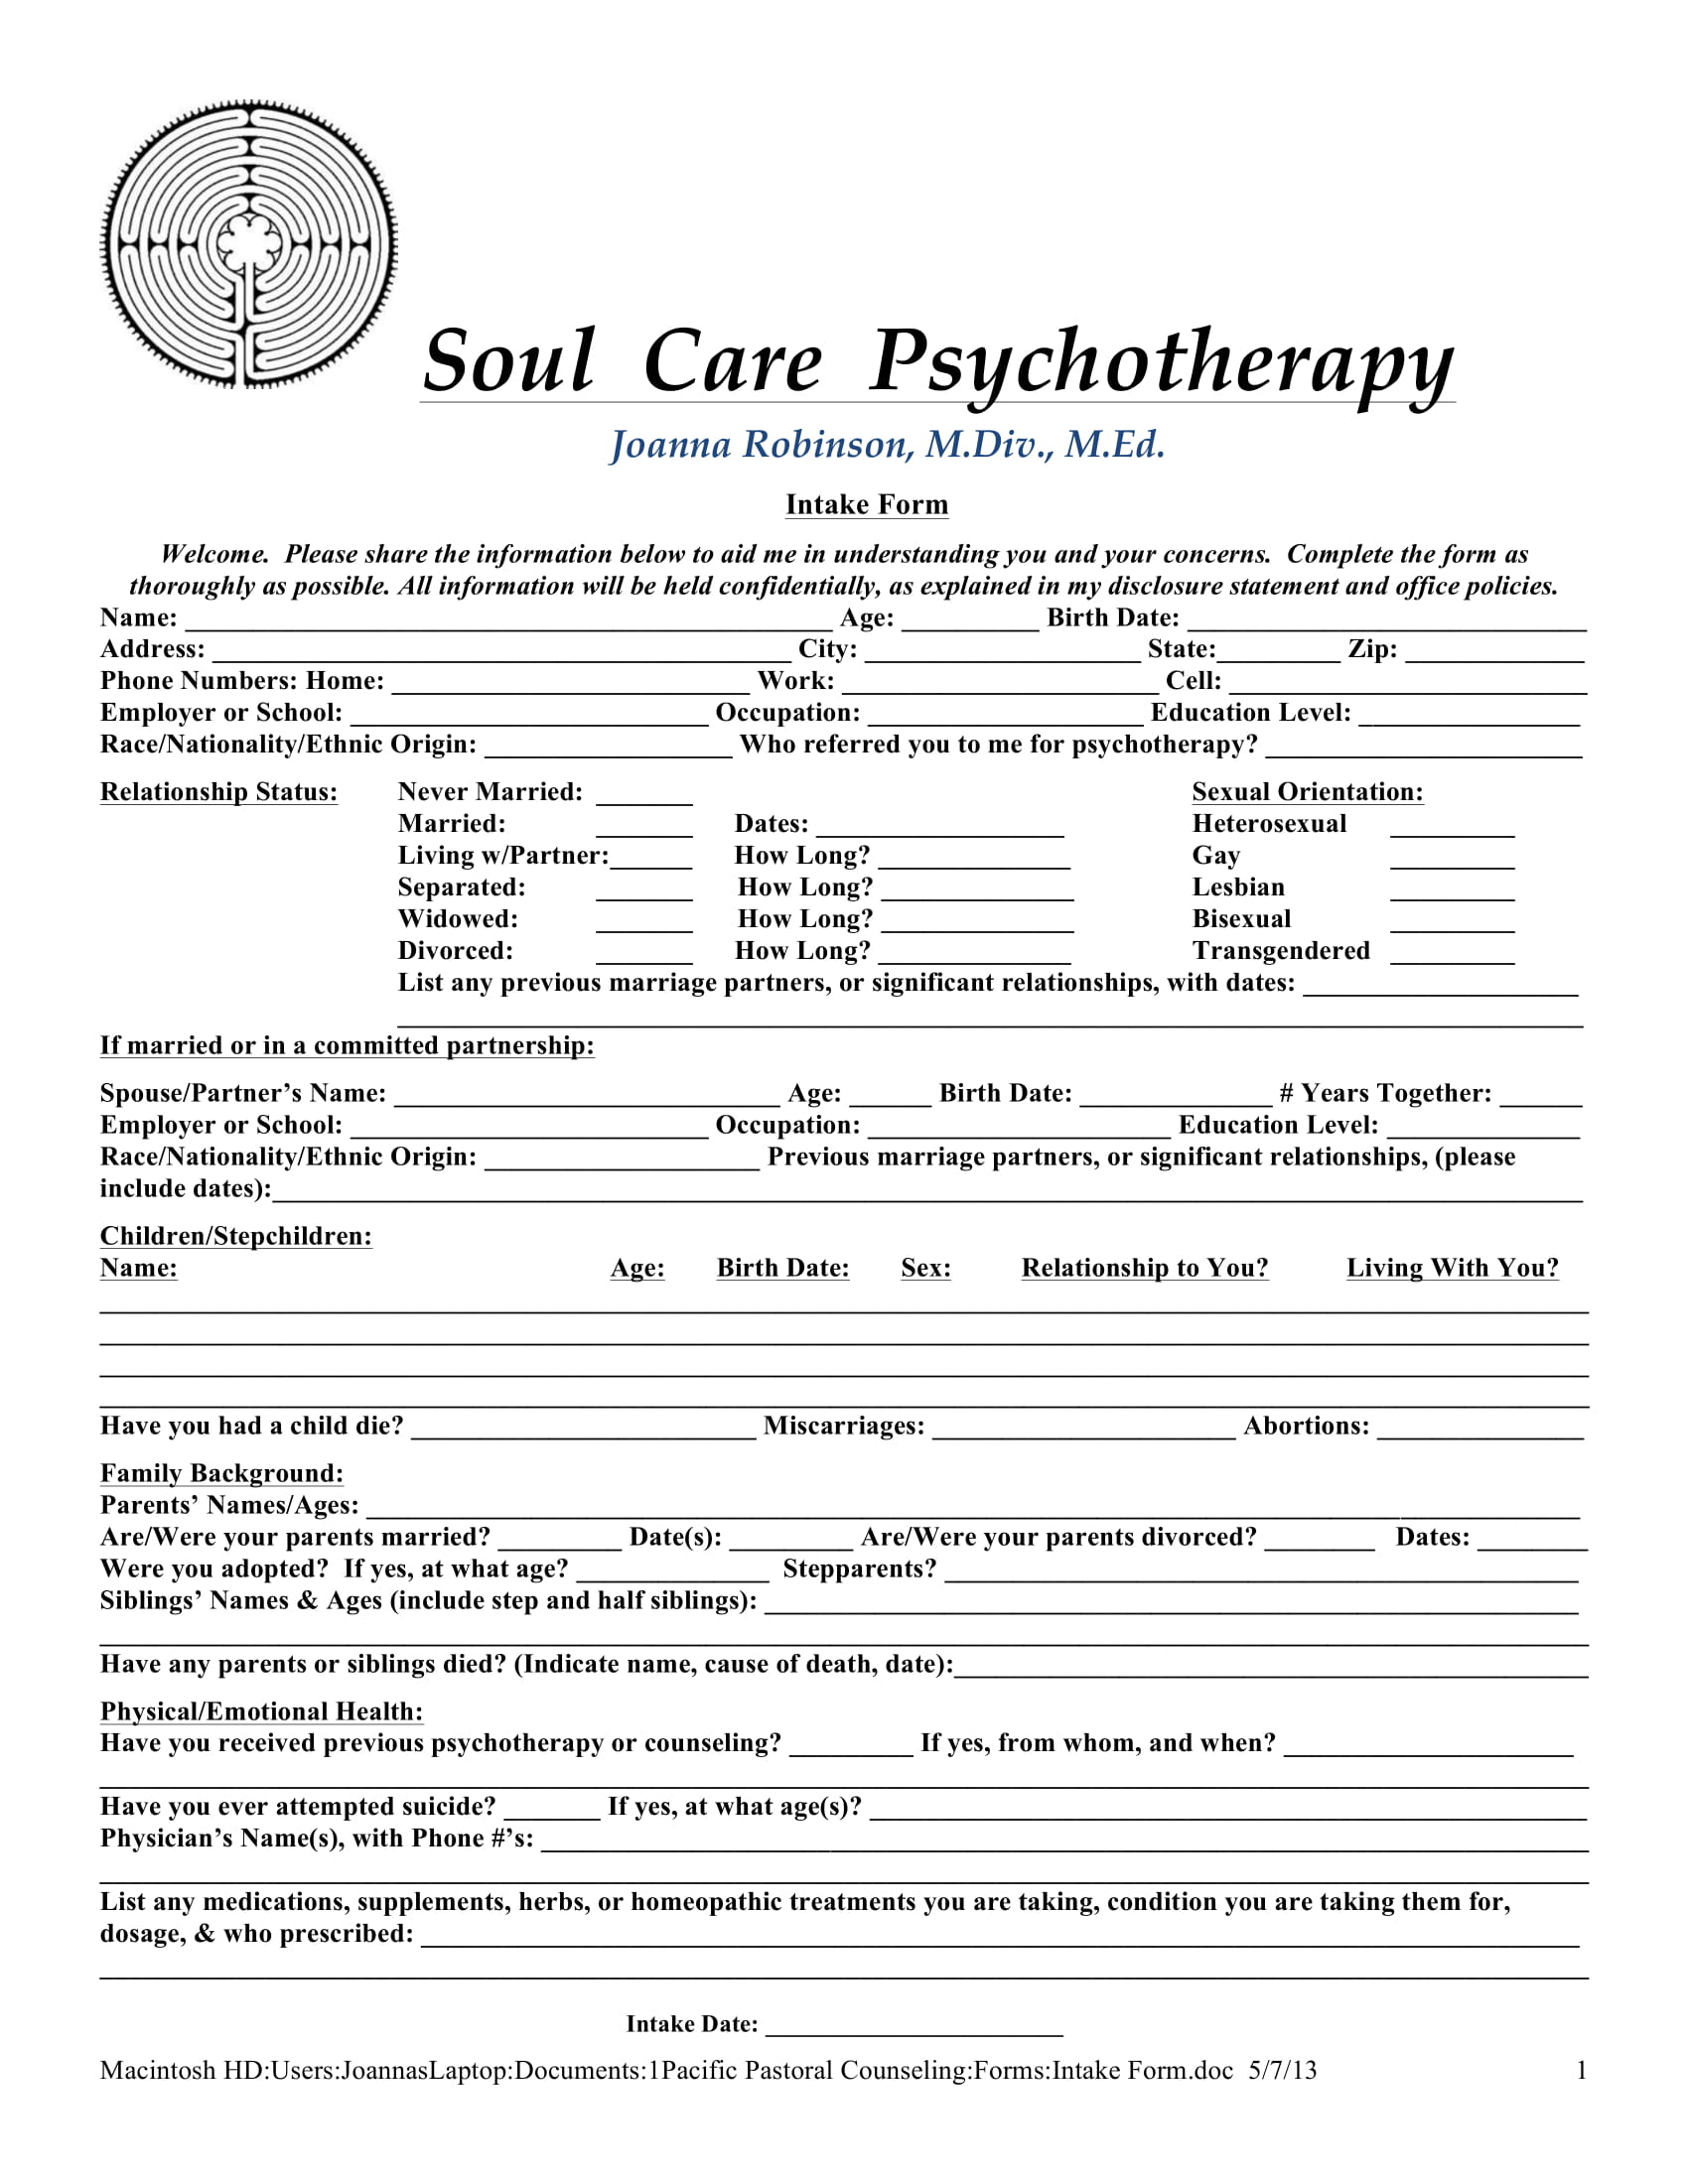 psychotherapy intake form sample 1